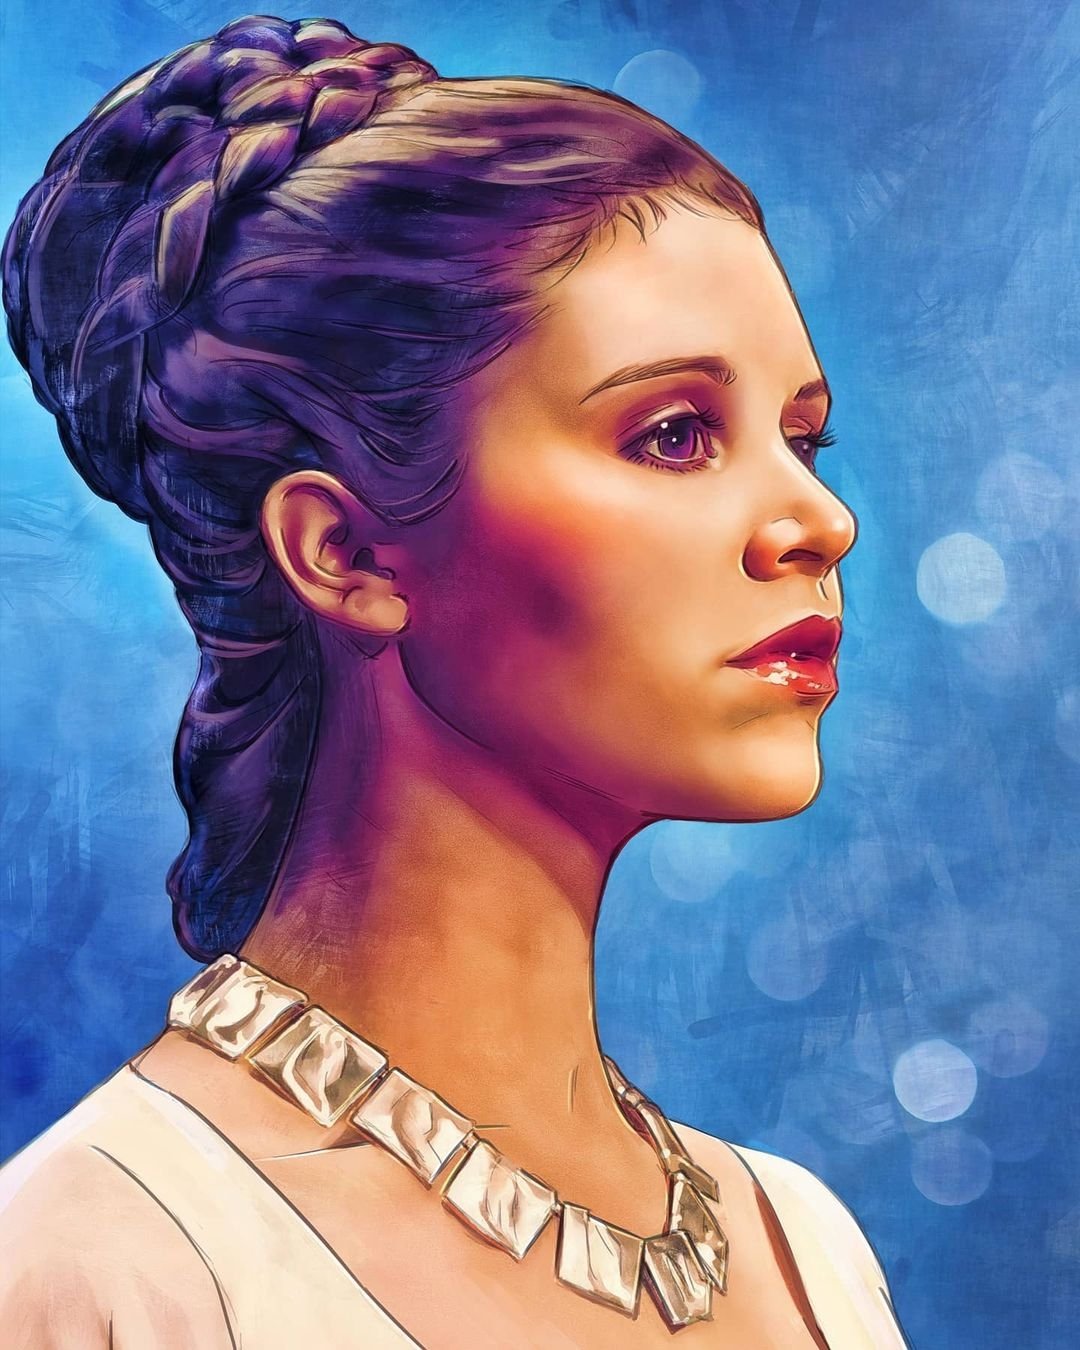 Leia. 
Happy Birthday to our Princess Carrie Fisher.
Art by Daia 